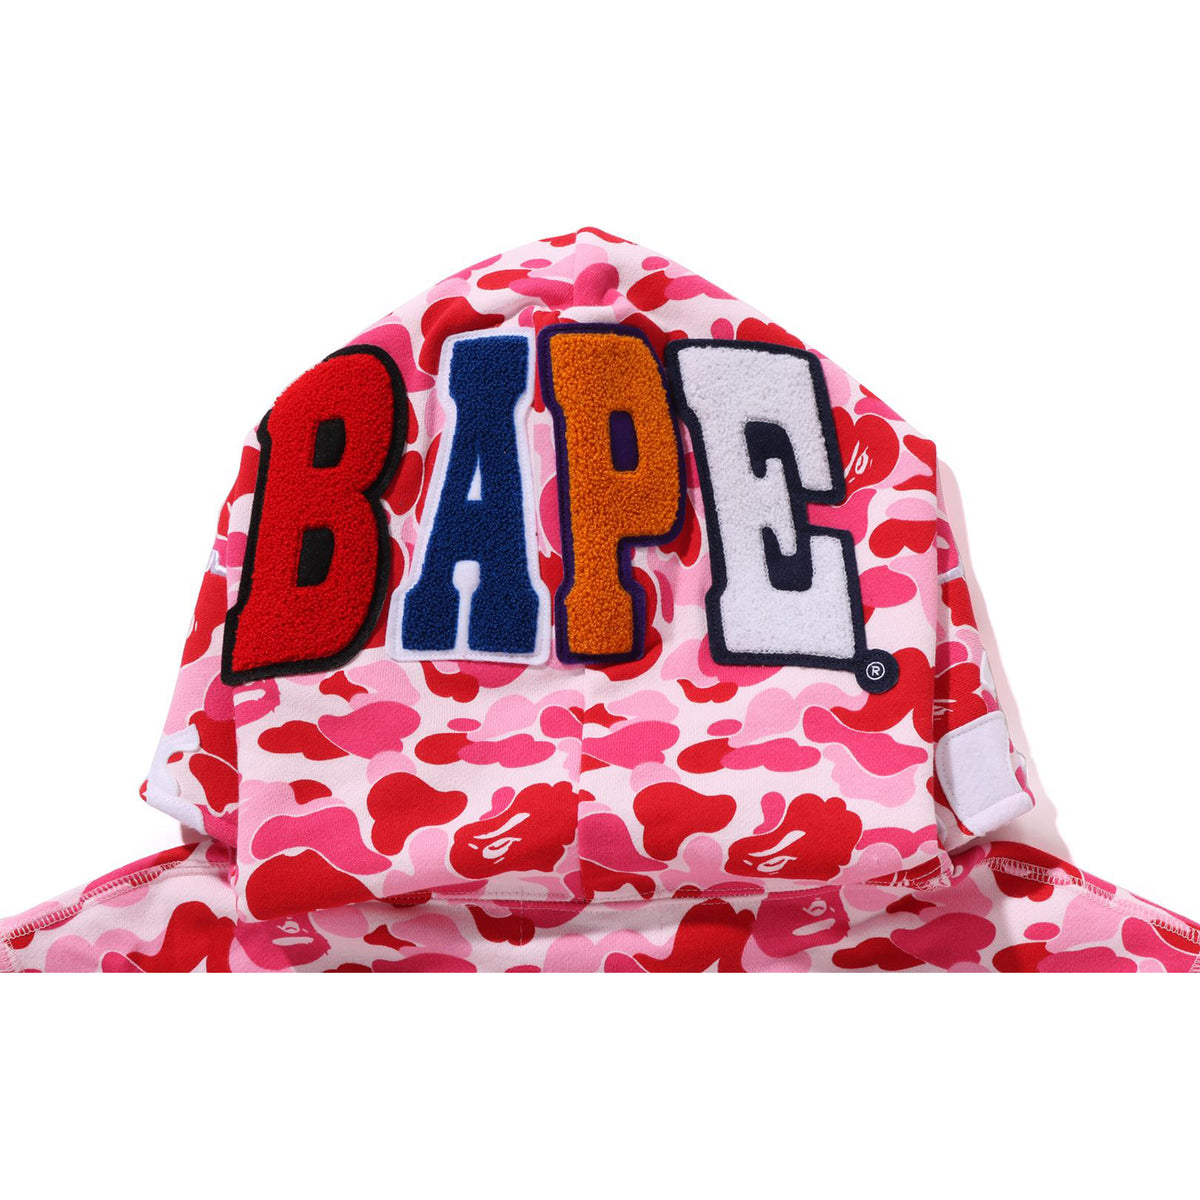 ABC CAMO 2ND APE PULLOVER HOODIE MENS